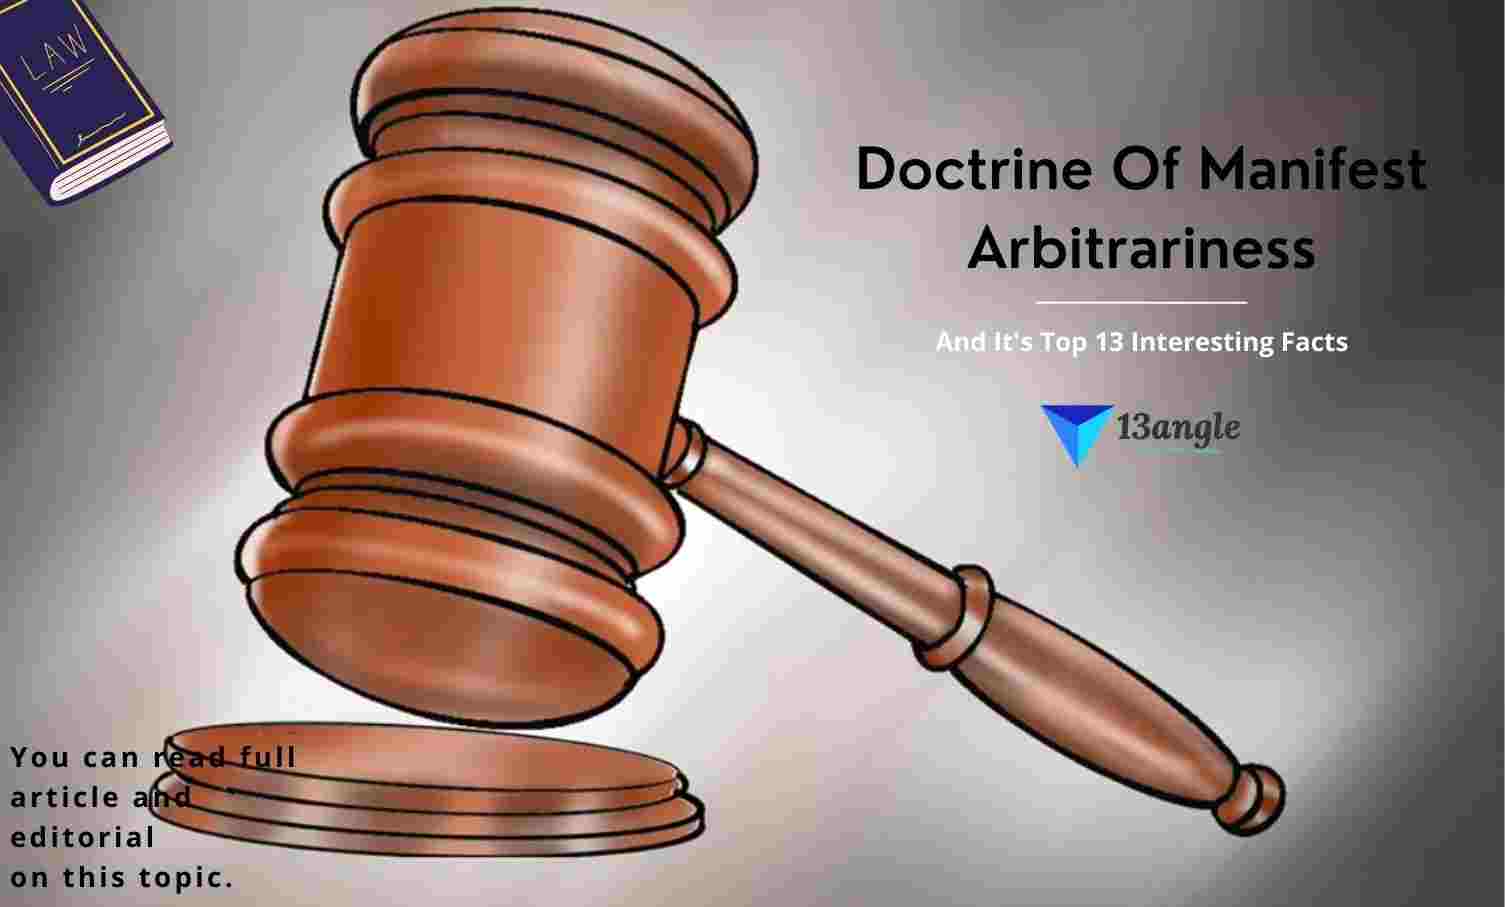 Doctrine Of Manifest Arbitrariness And It's Top 13 Interesting Facts- 13angle.com